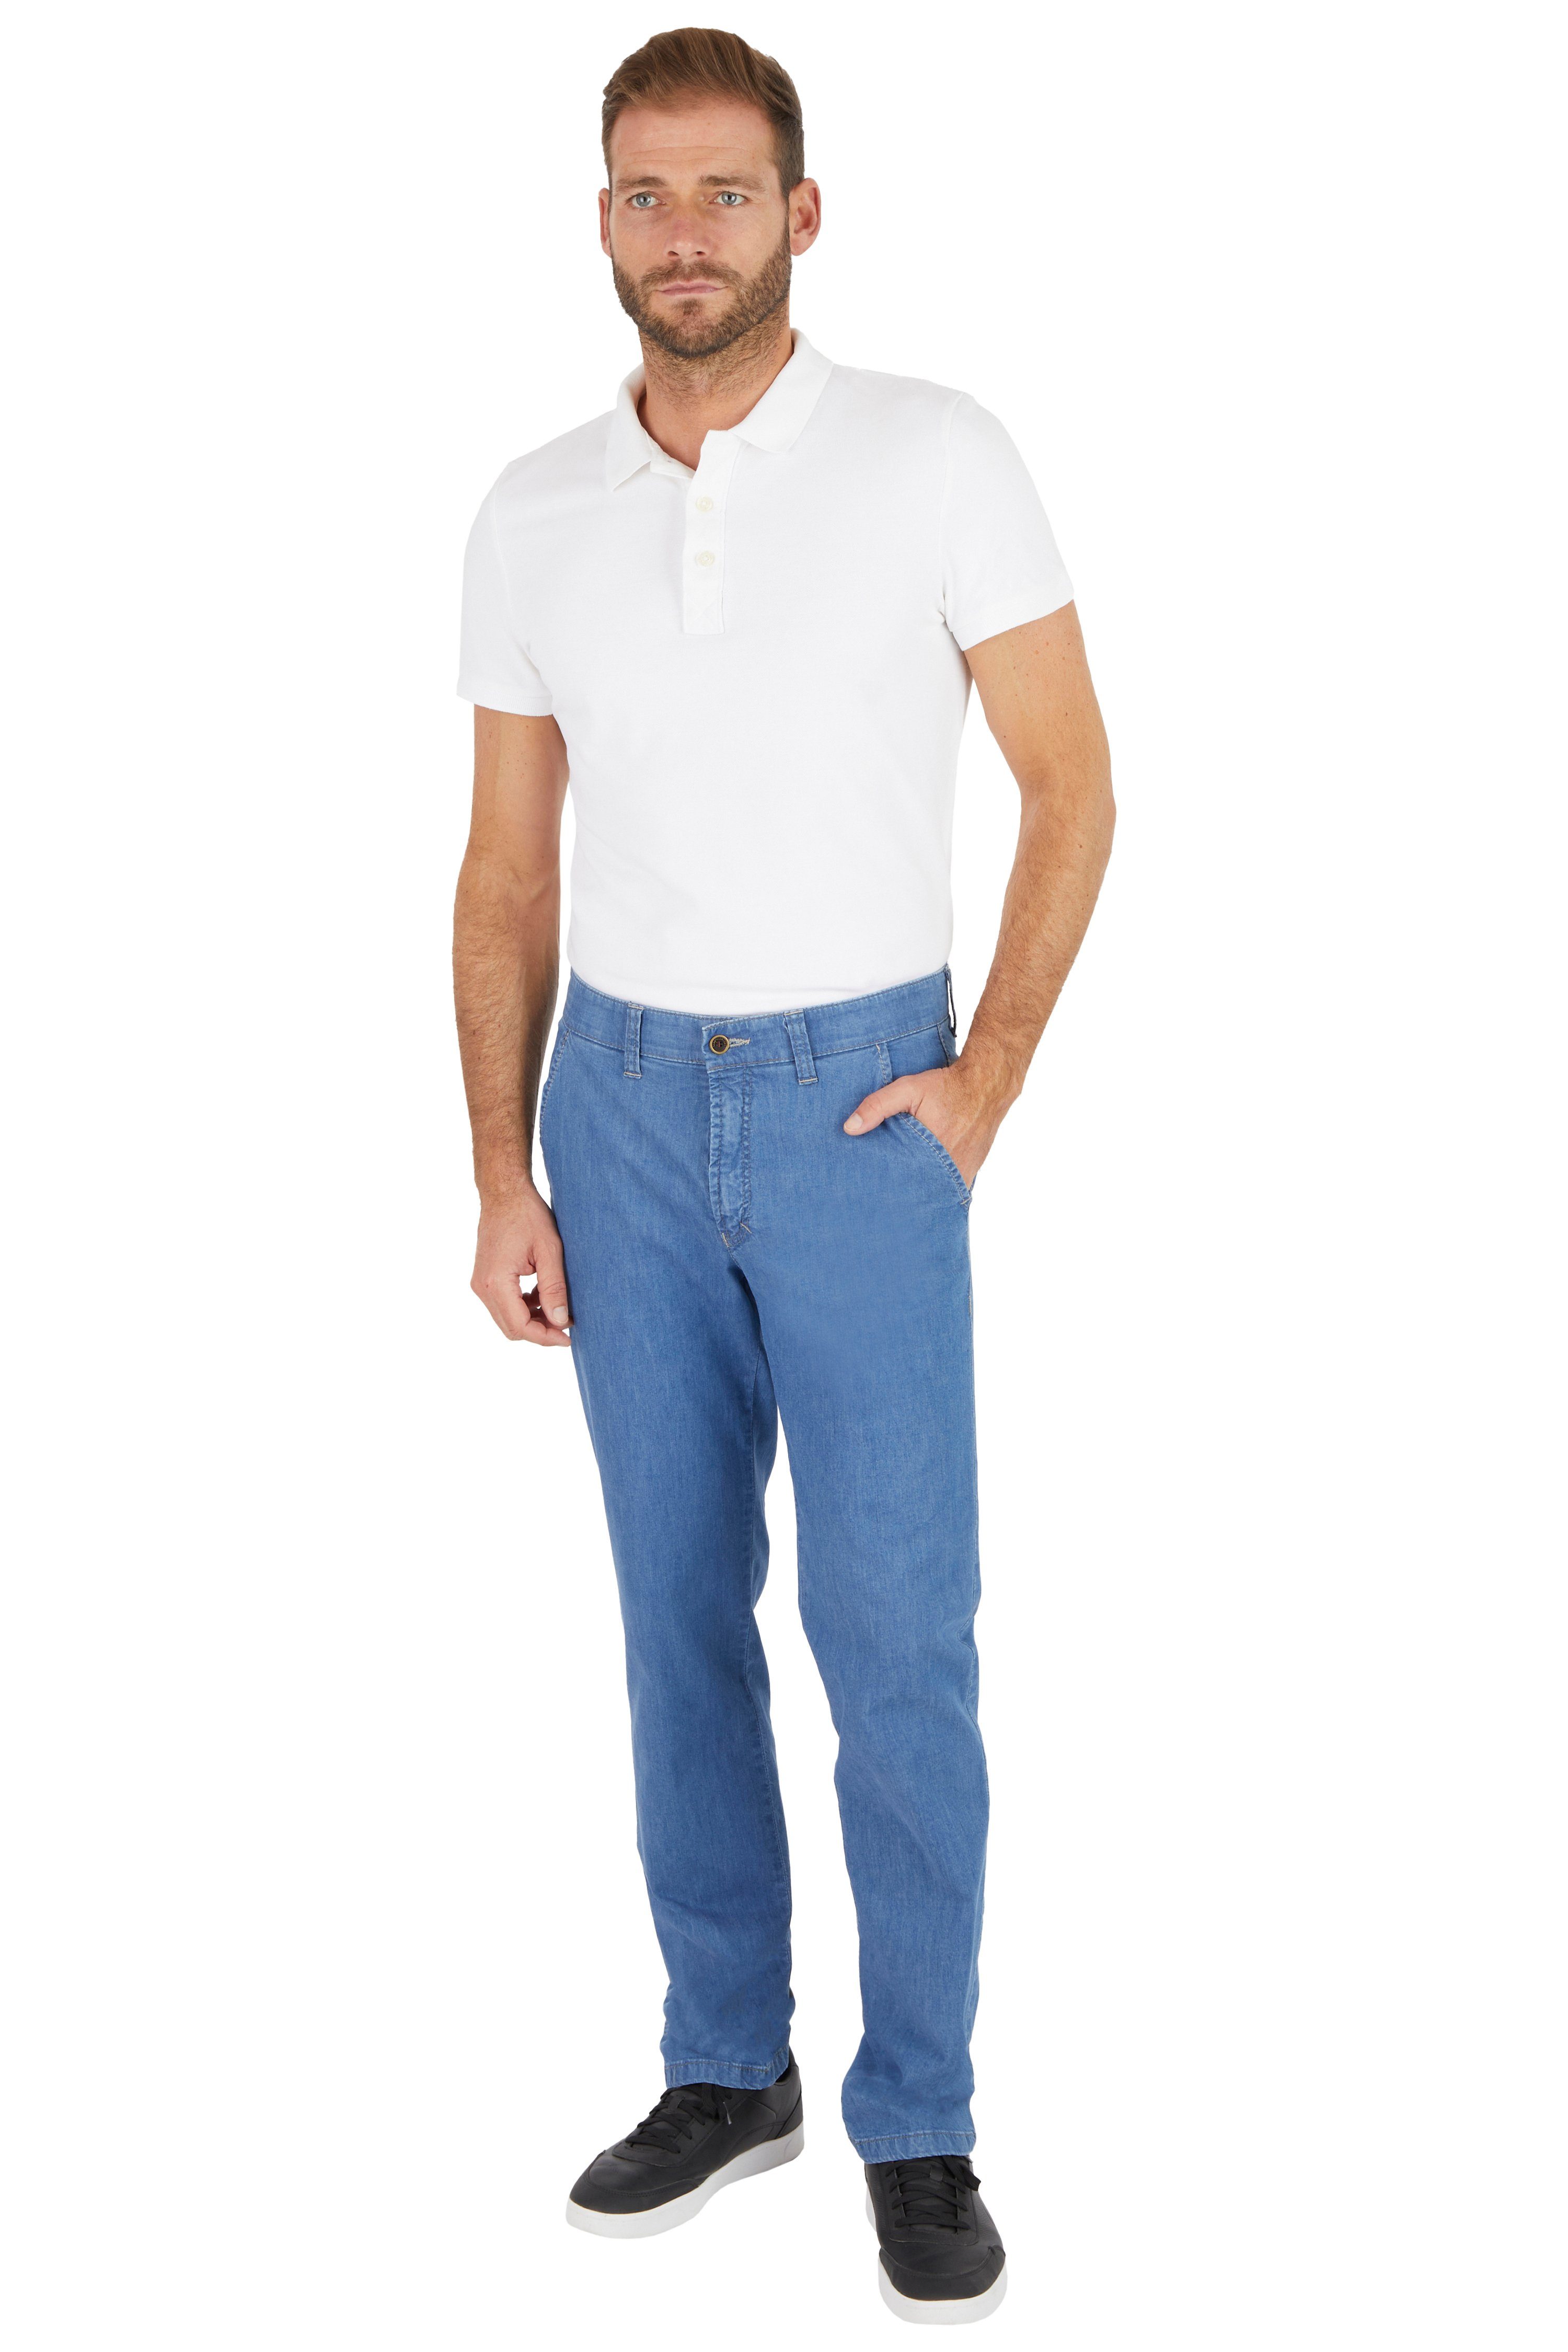 Bequeme Jeans of Comfort Club